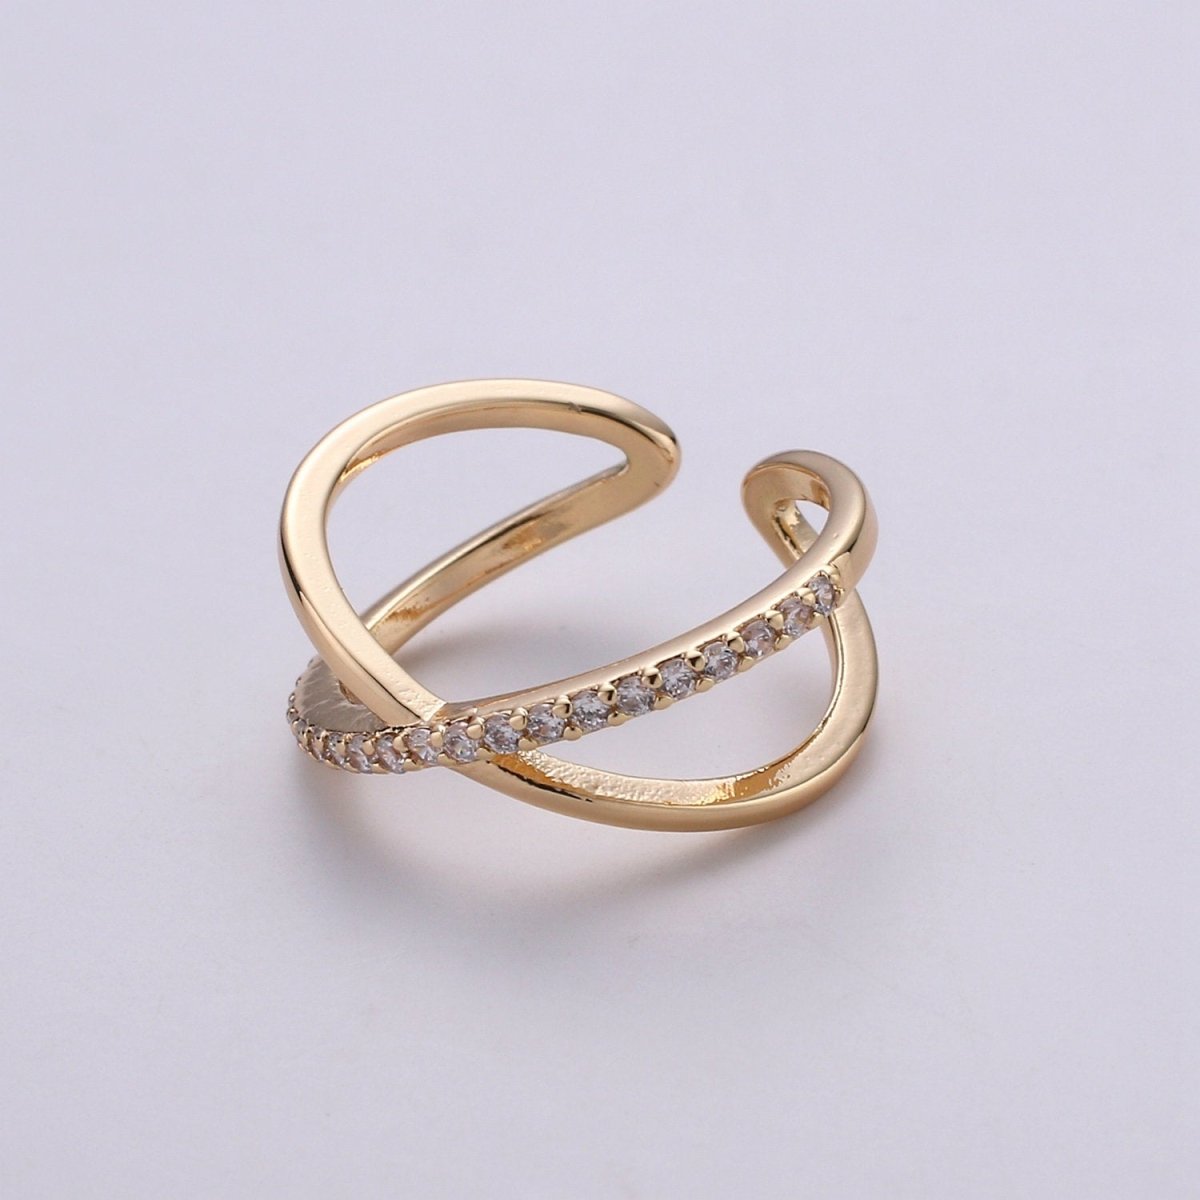 Gold Infinity Ring | Criss Cross Ring | Dainty Fine Ring or Delicate Thumb Ring | Open Ring | Adjustable Ring | Micro Pave CZ Ring R-055 - DLUXCA